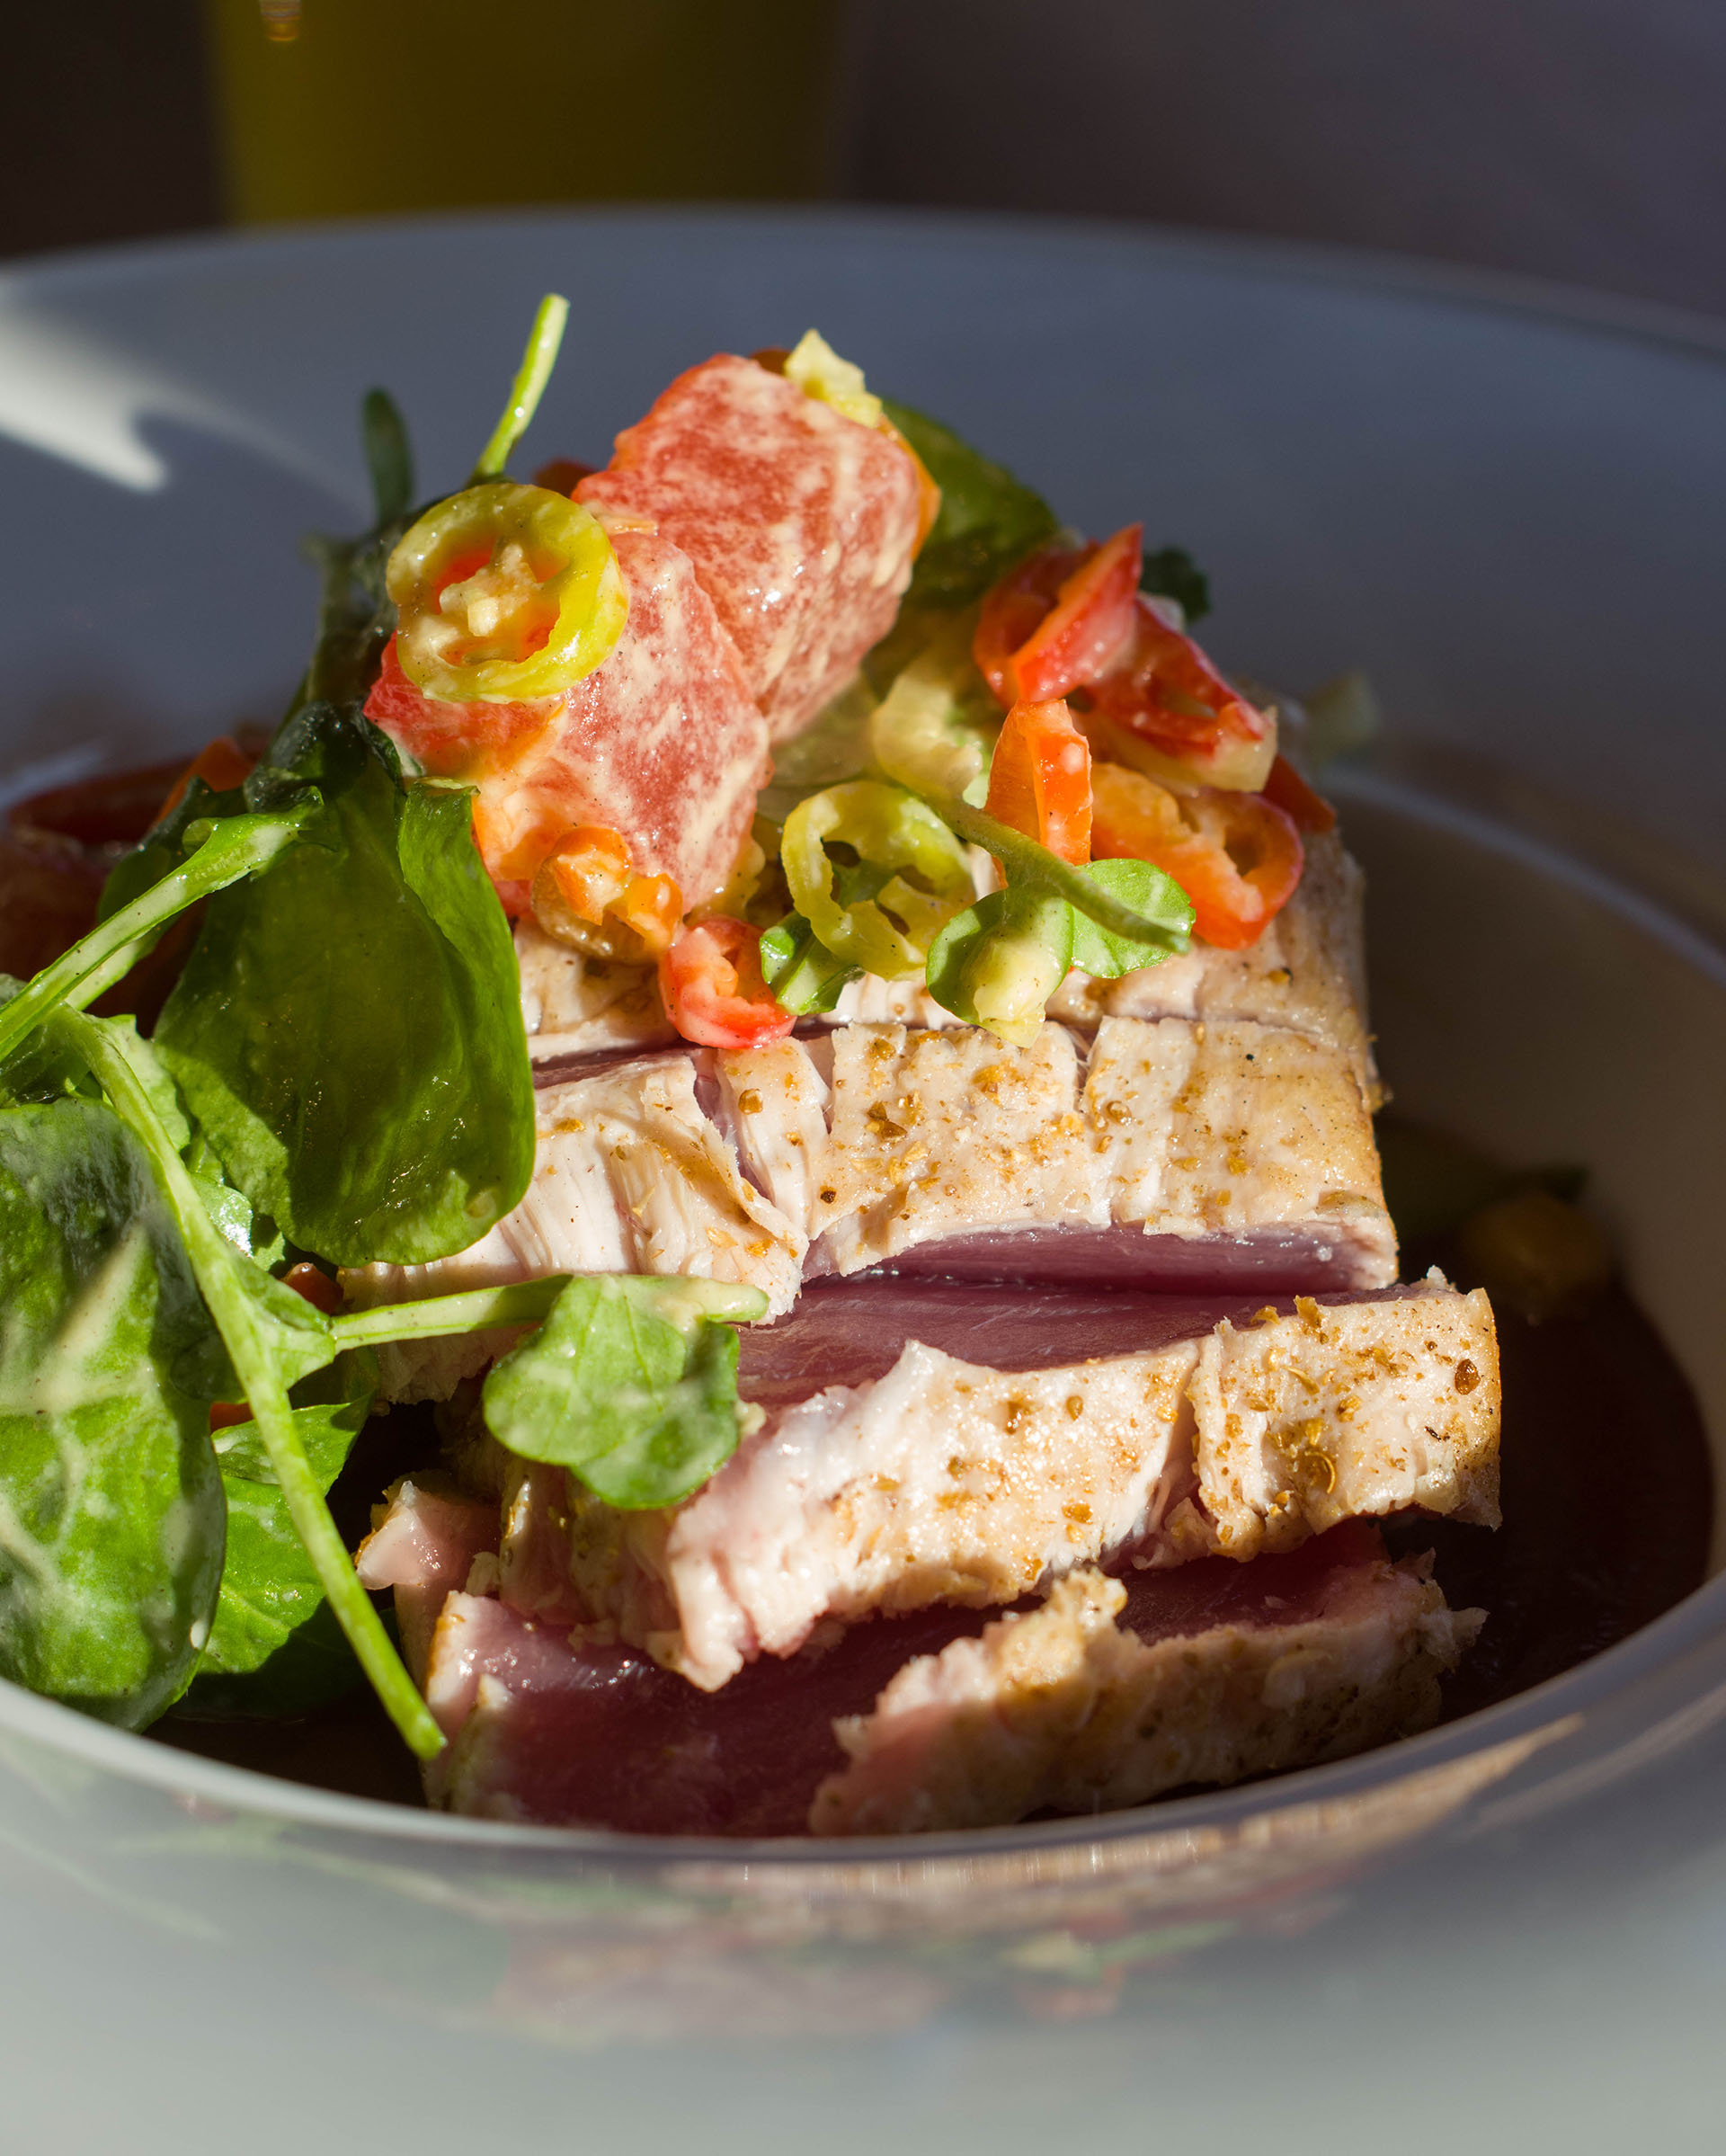 Slices of tuna steak with summer salad on top